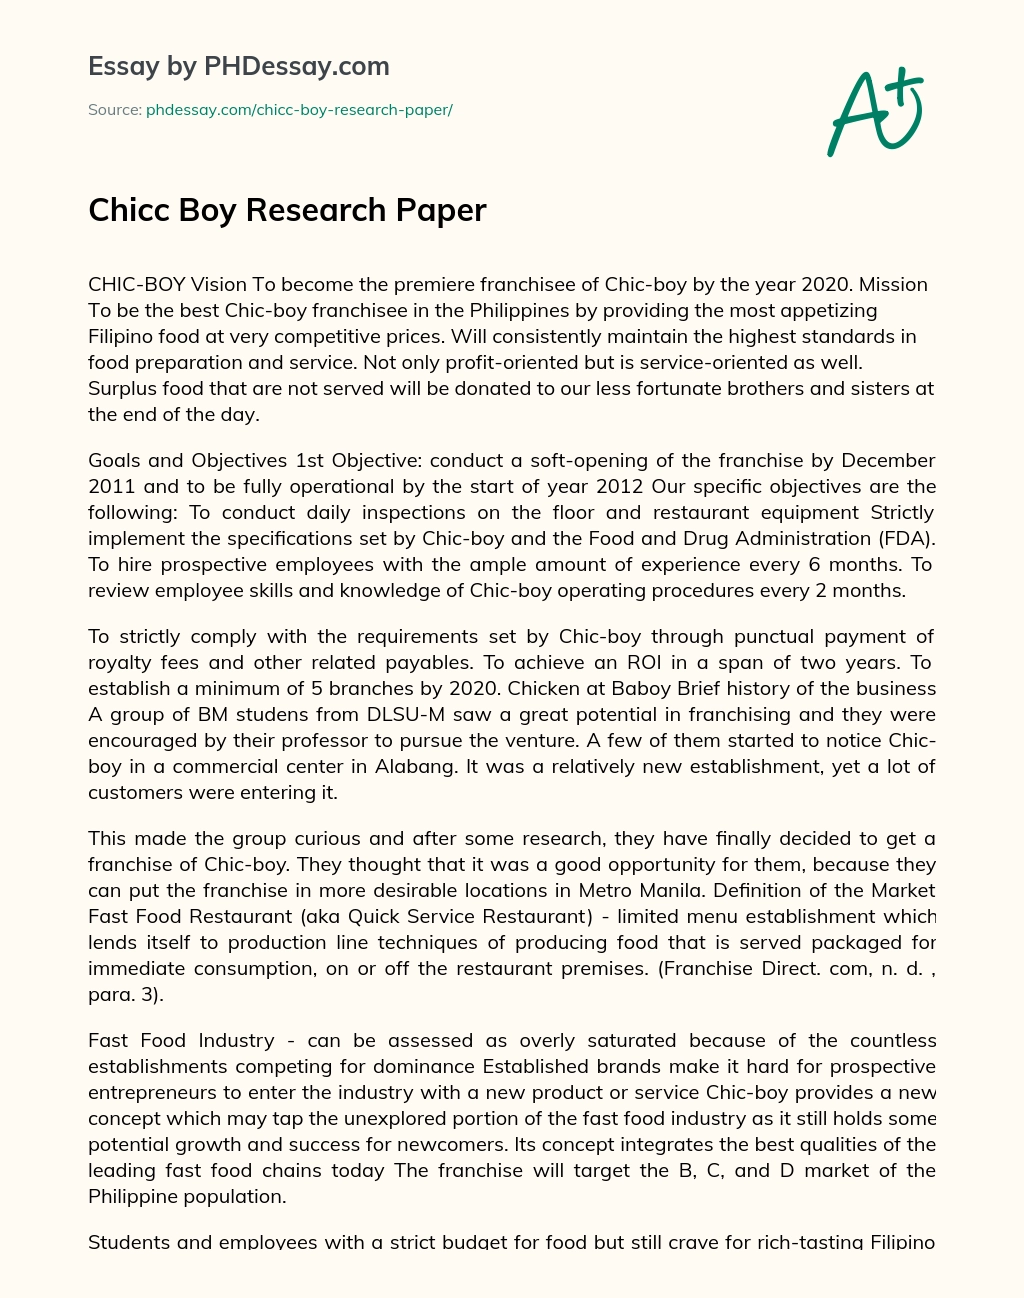 Chicc Boy Research Paper essay